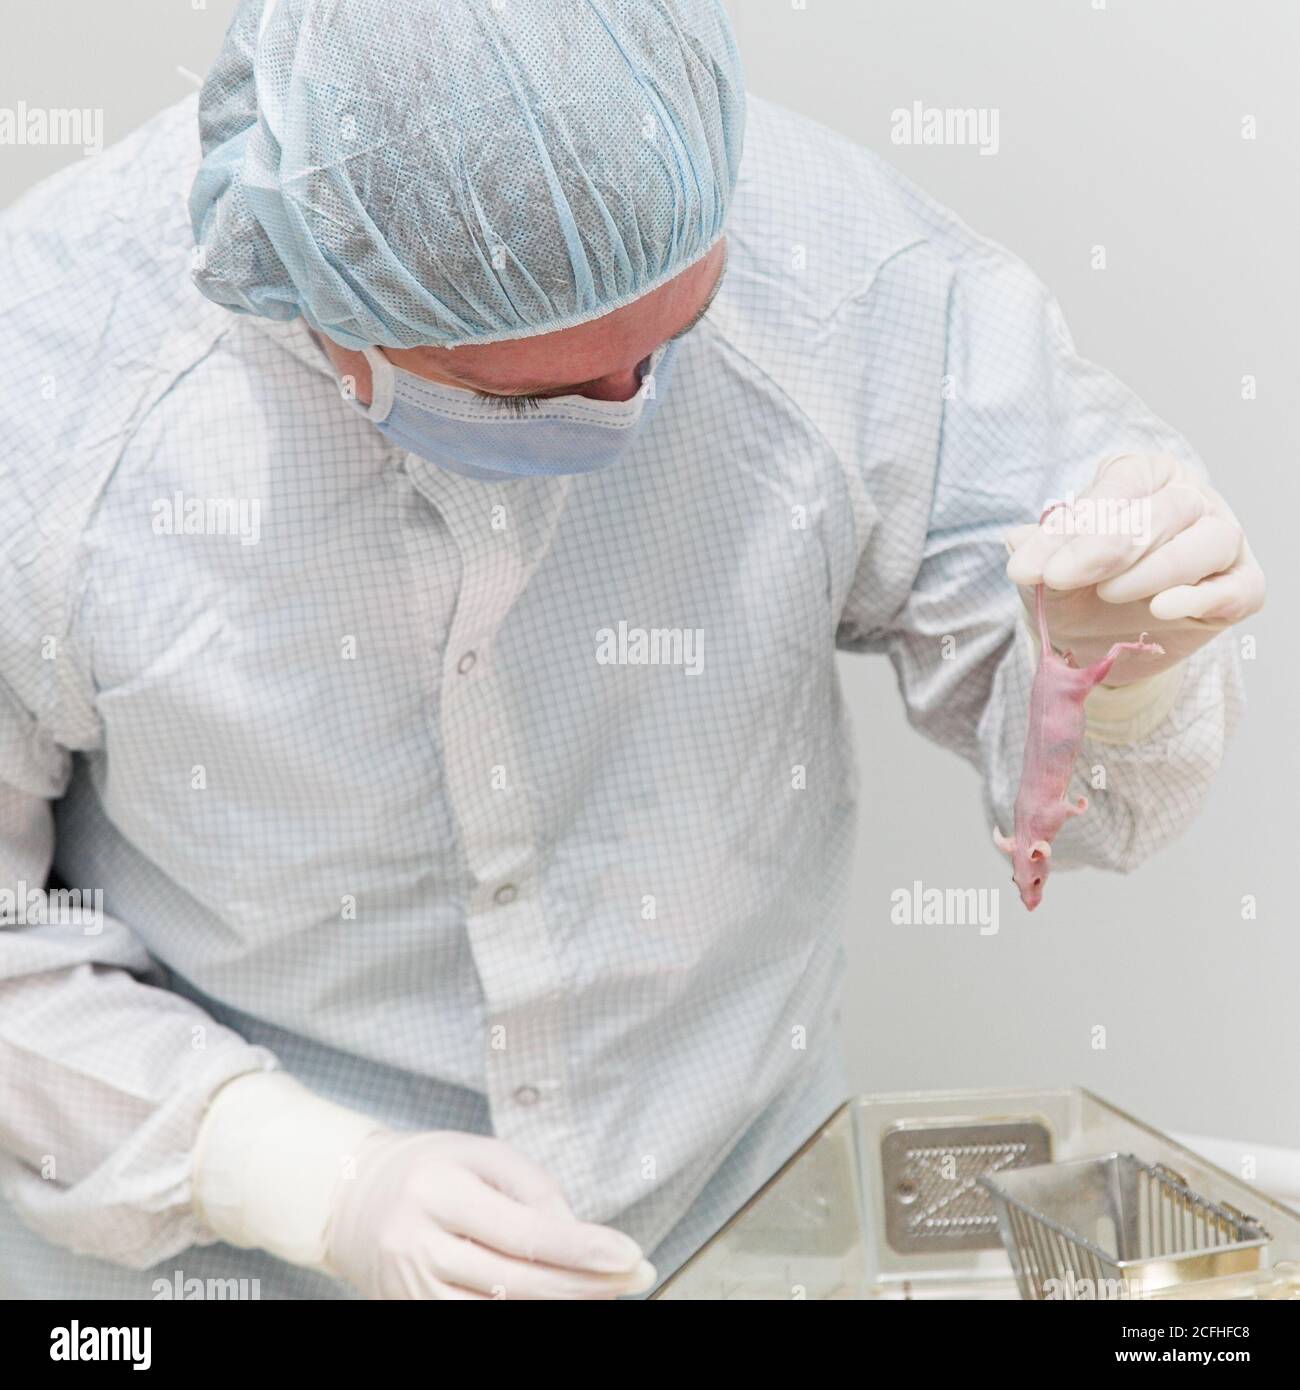 Scientist holding laboratory mouse in hands Stock Photo